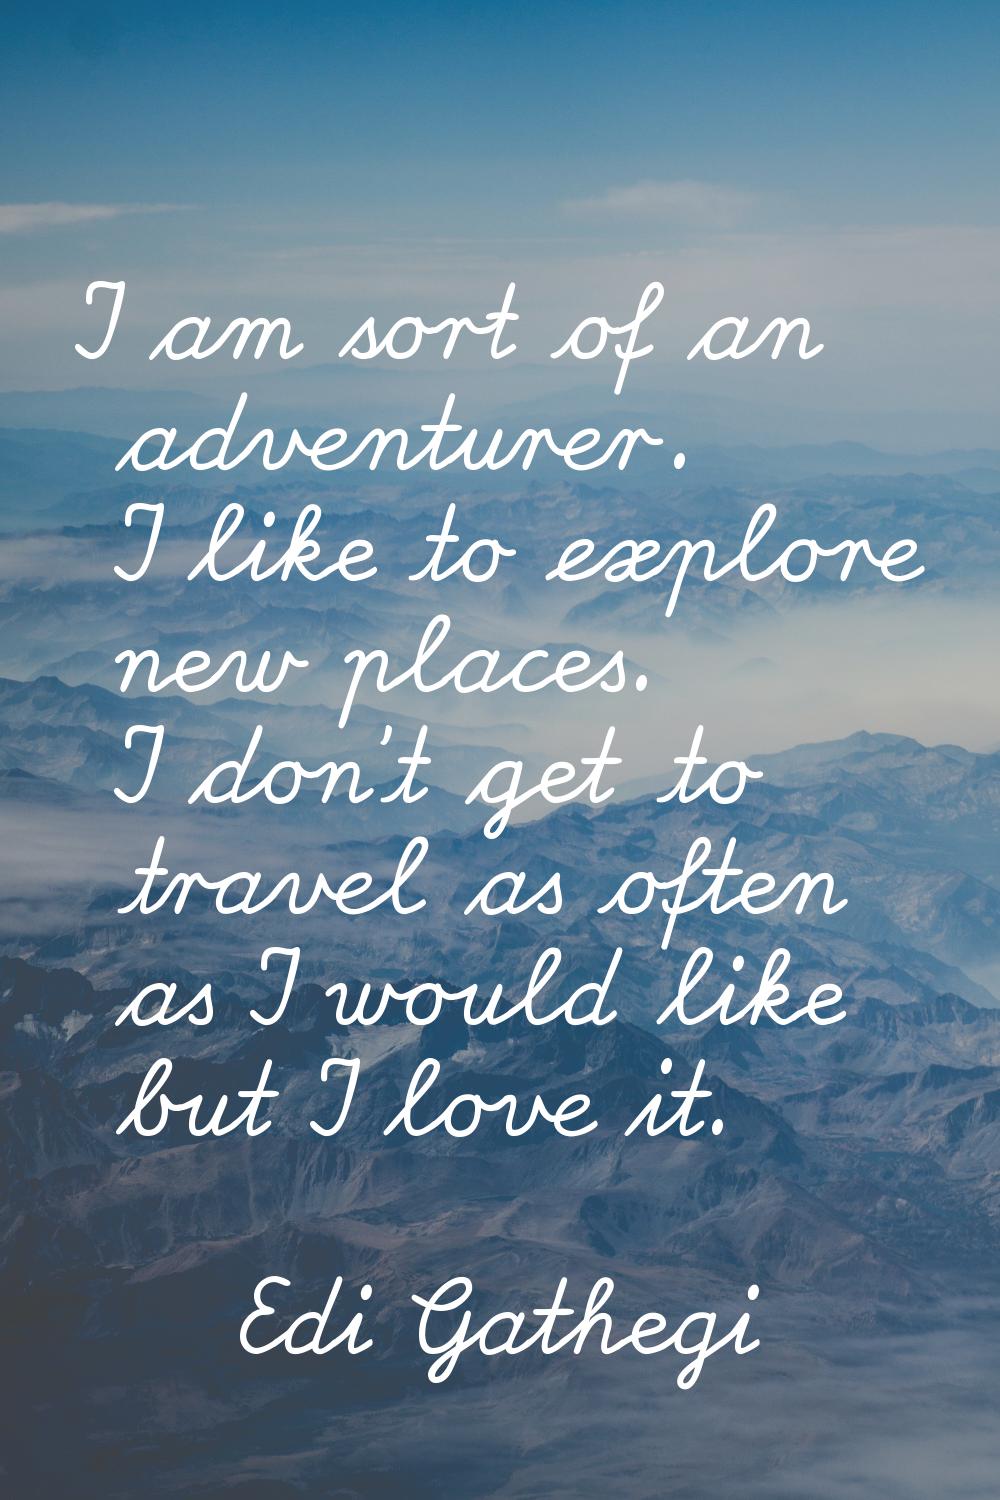 I am sort of an adventurer. I like to explore new places. I don't get to travel as often as I would